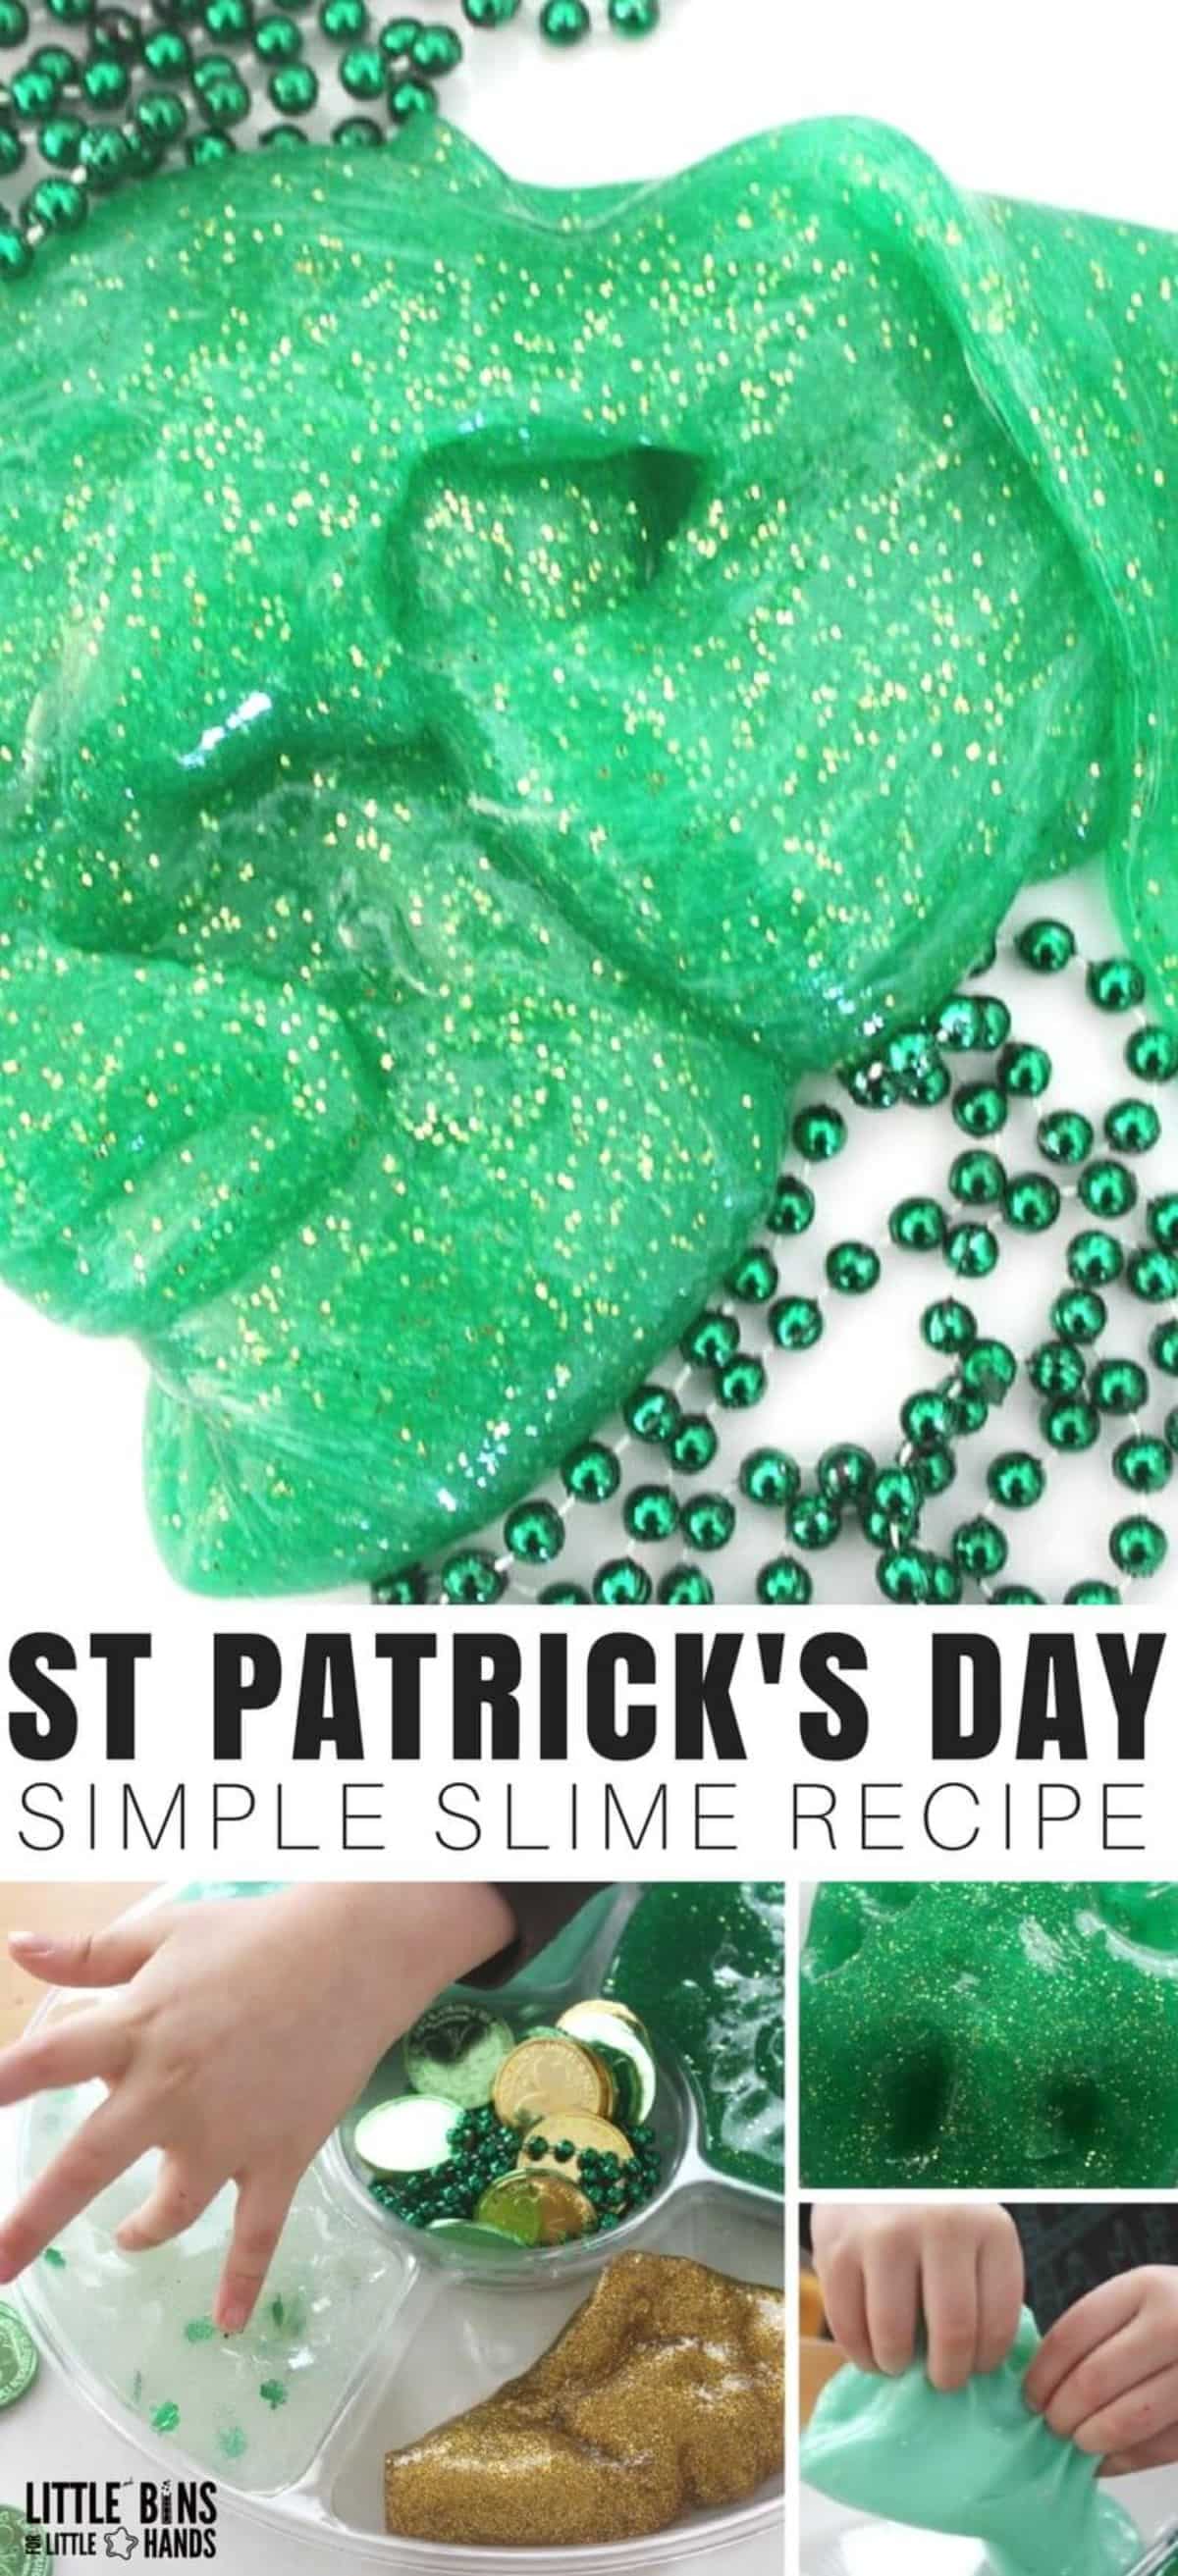 Paddy's Day Special Slime